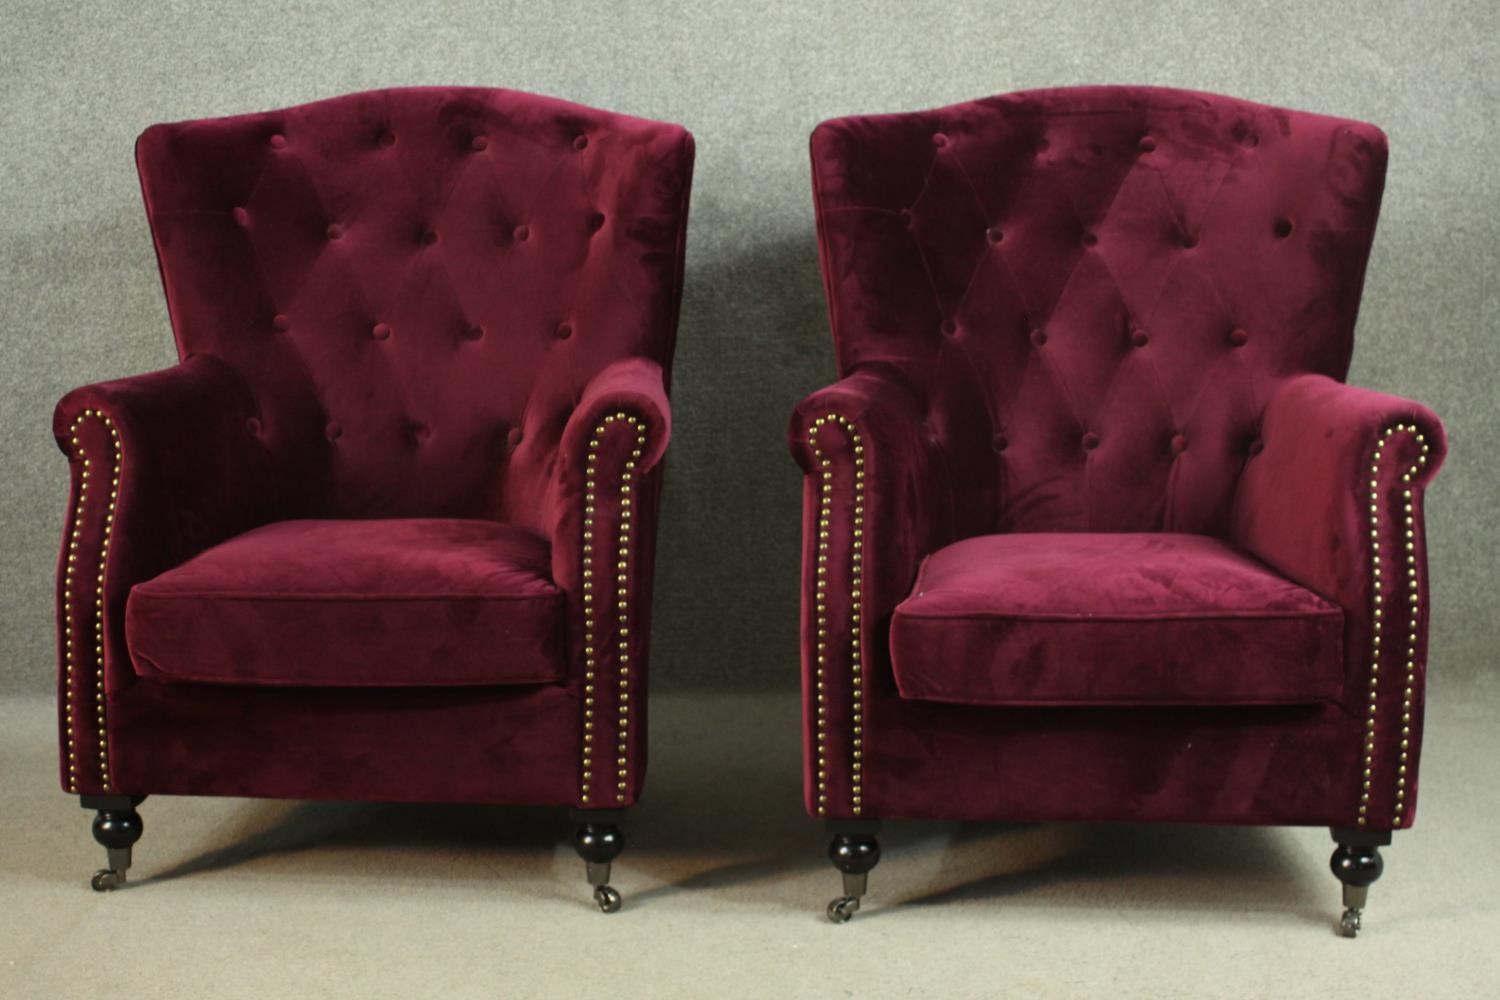 A pair of Victorian style wingback armchairs, upholstered in purple velour, with a buttoned back,